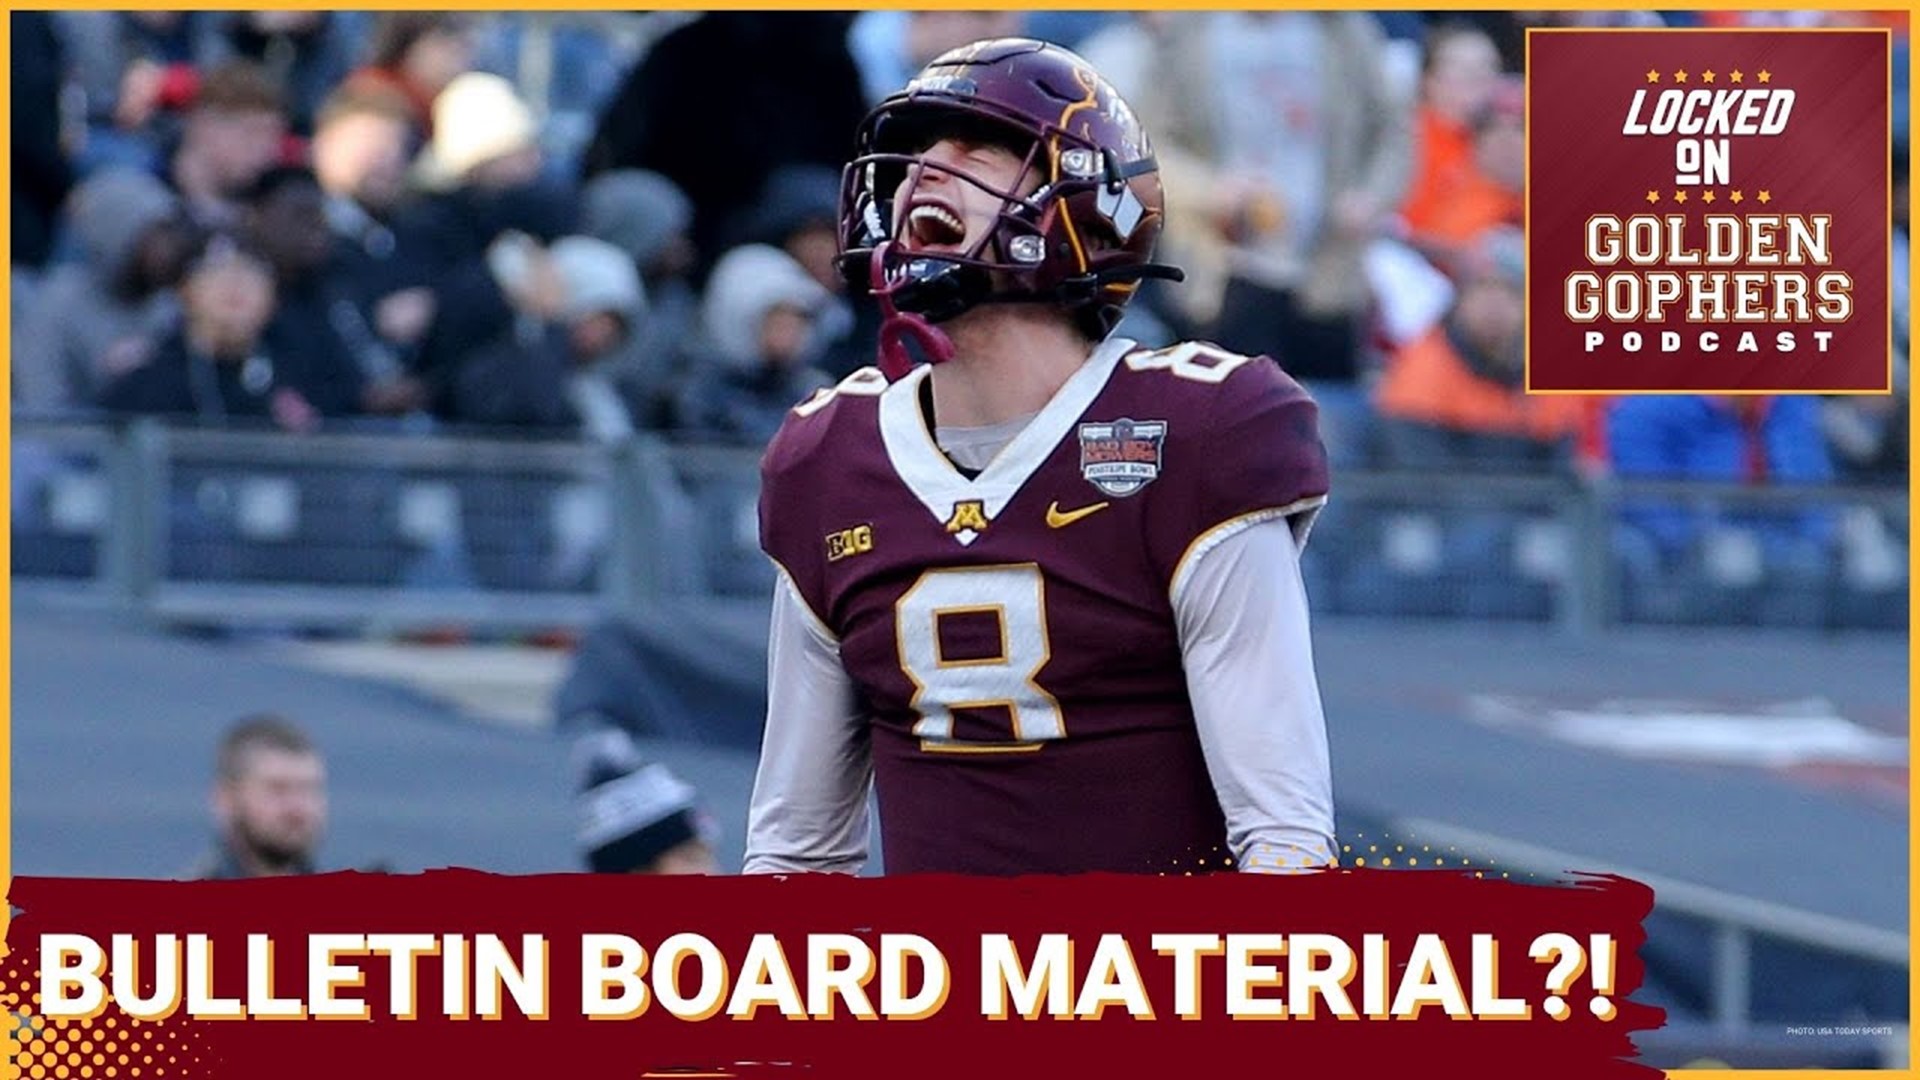 On today's show of the Locked On Golden Gophers podcast, we discuss the different pathways for the Minnesota Gophers when it comes to obtaining Top 25 recognition.